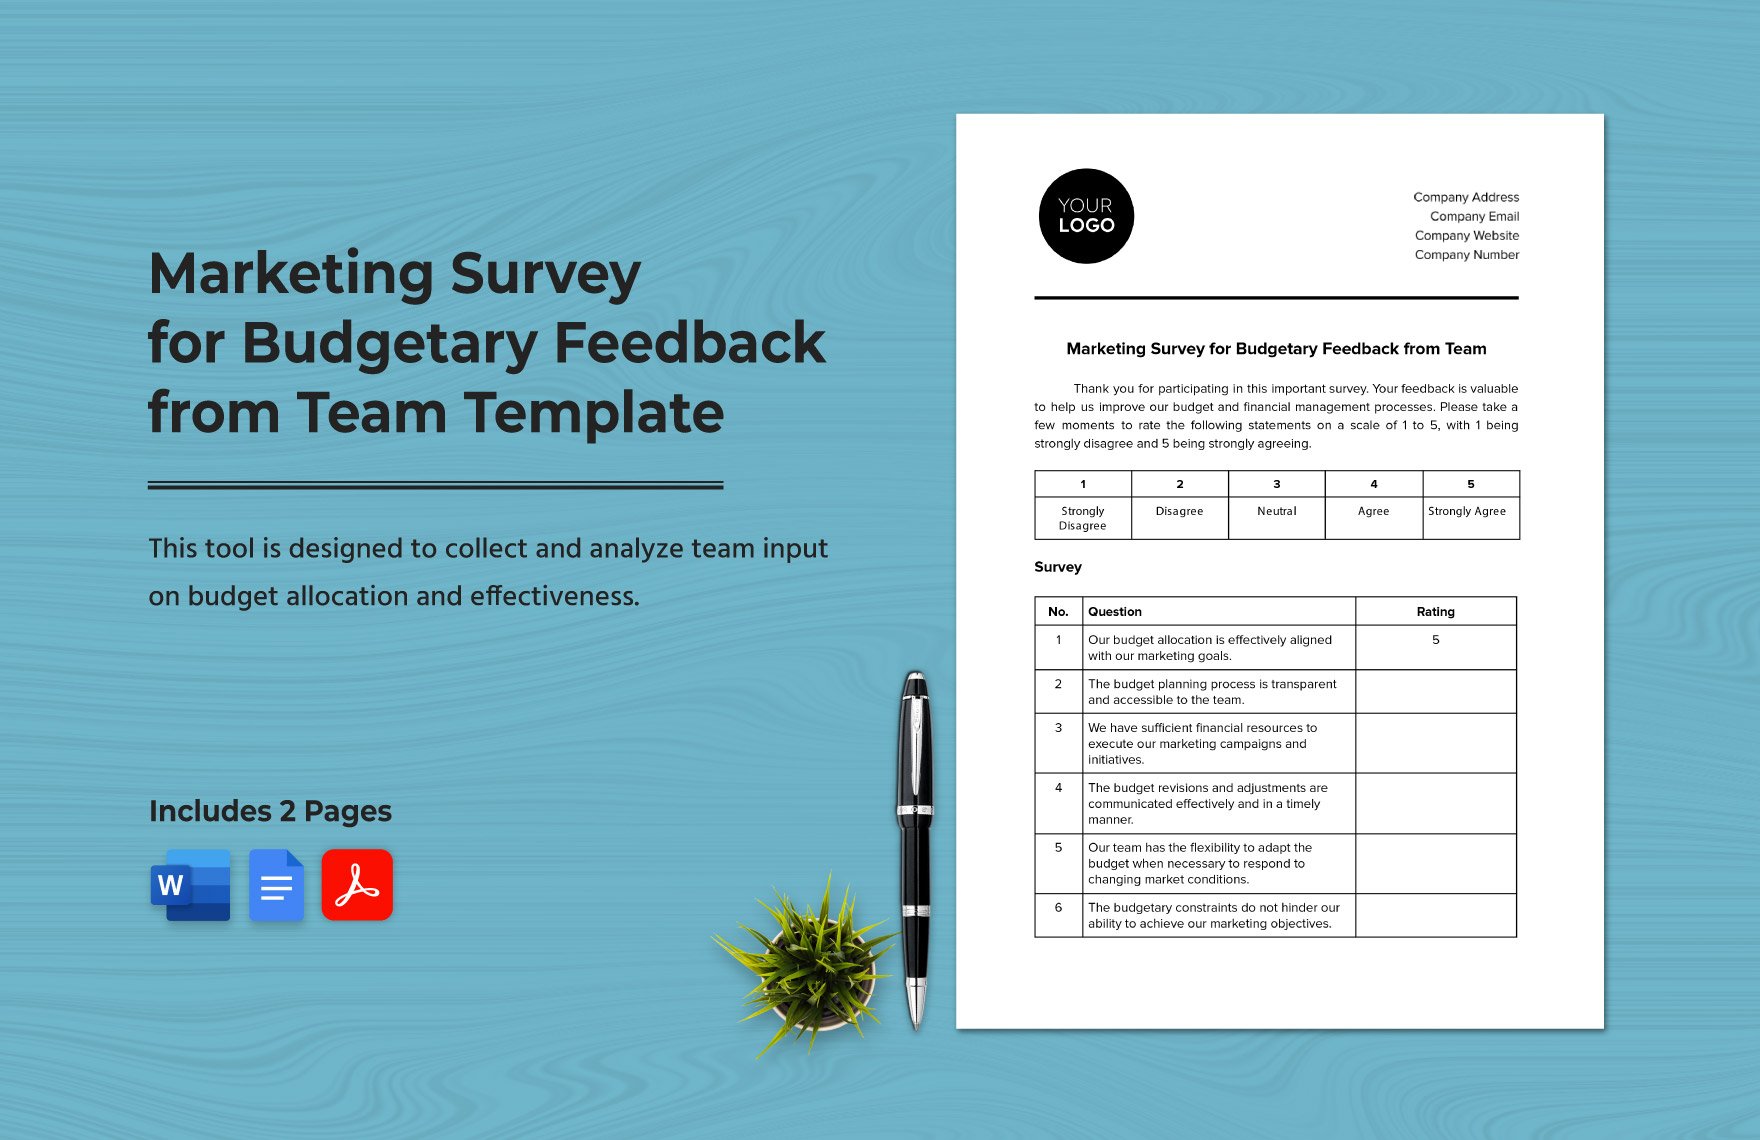 Marketing Survey for Budgetary Feedback from Team Template